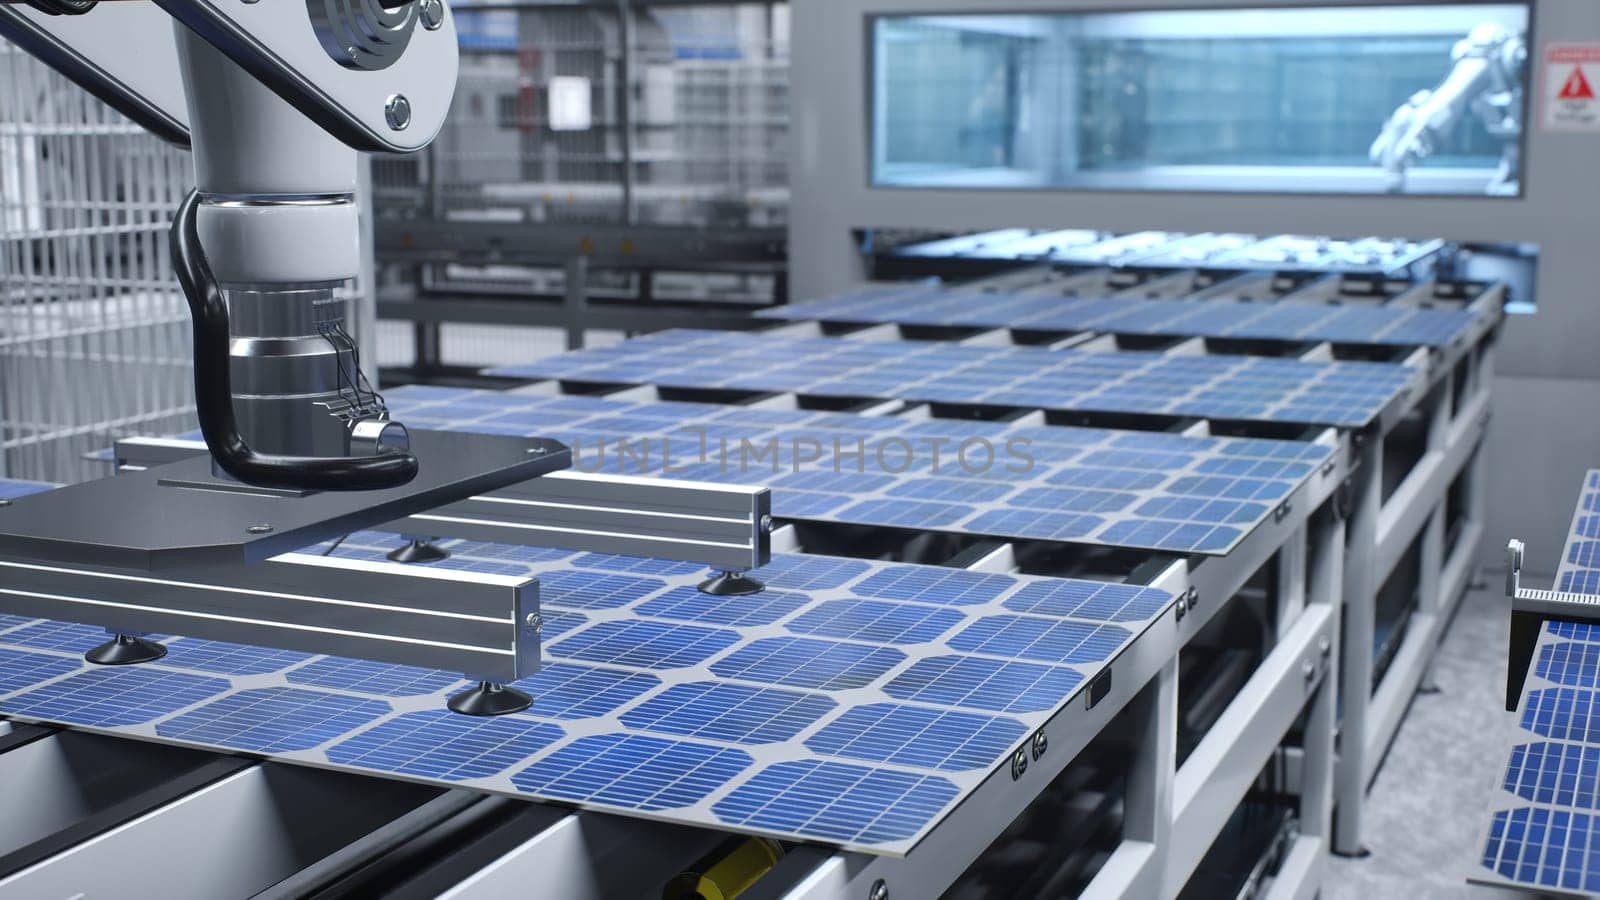 Focus on solar panels on conveyor belts with robotic arms operating in industrial factory, 3D illustration. PV cells being moved around facility using production lines, close up shot